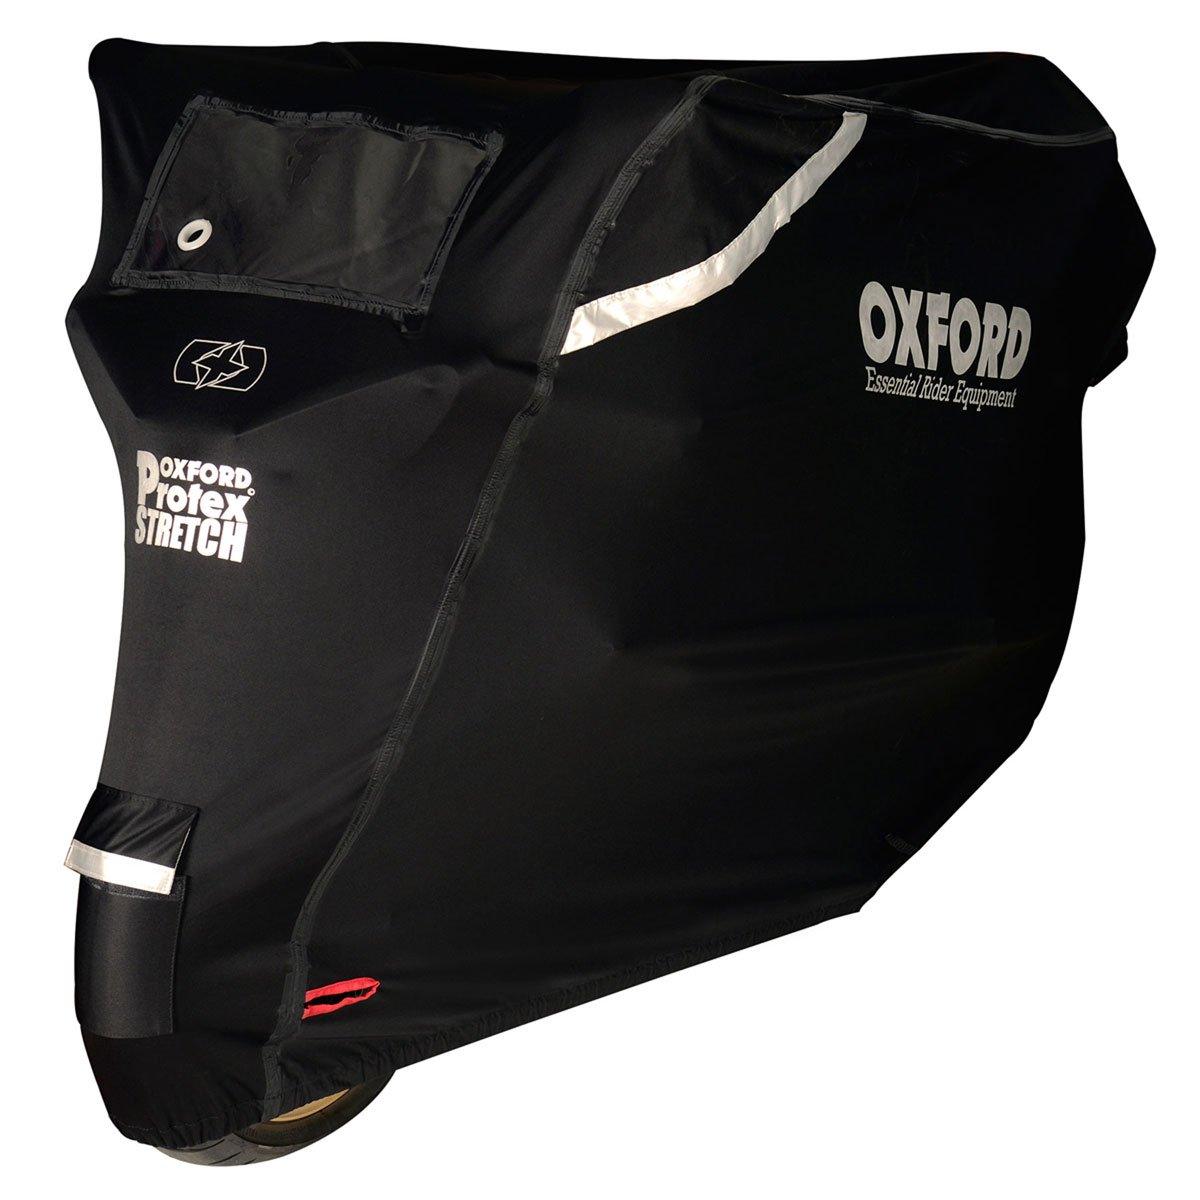 Oxford Protex Stretch Outdoor Motorcycle Cover Black - Vehicle Covers